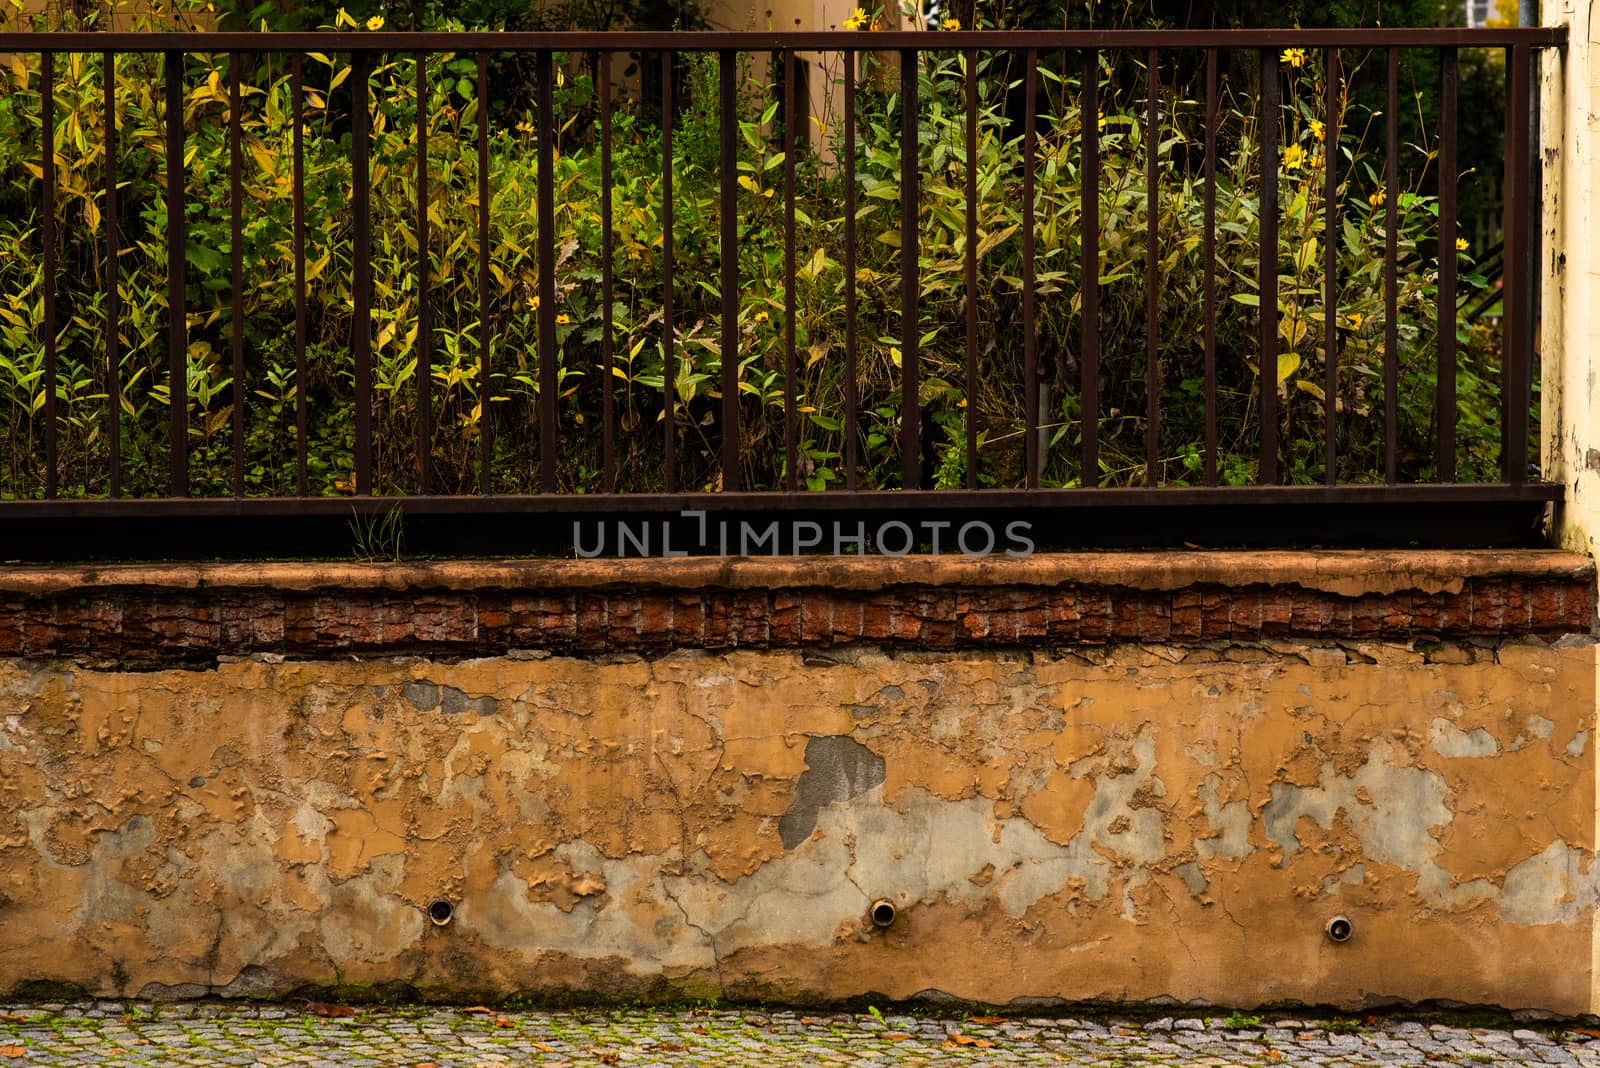 Rotten fence surrounding a house in the city by gonzalobell